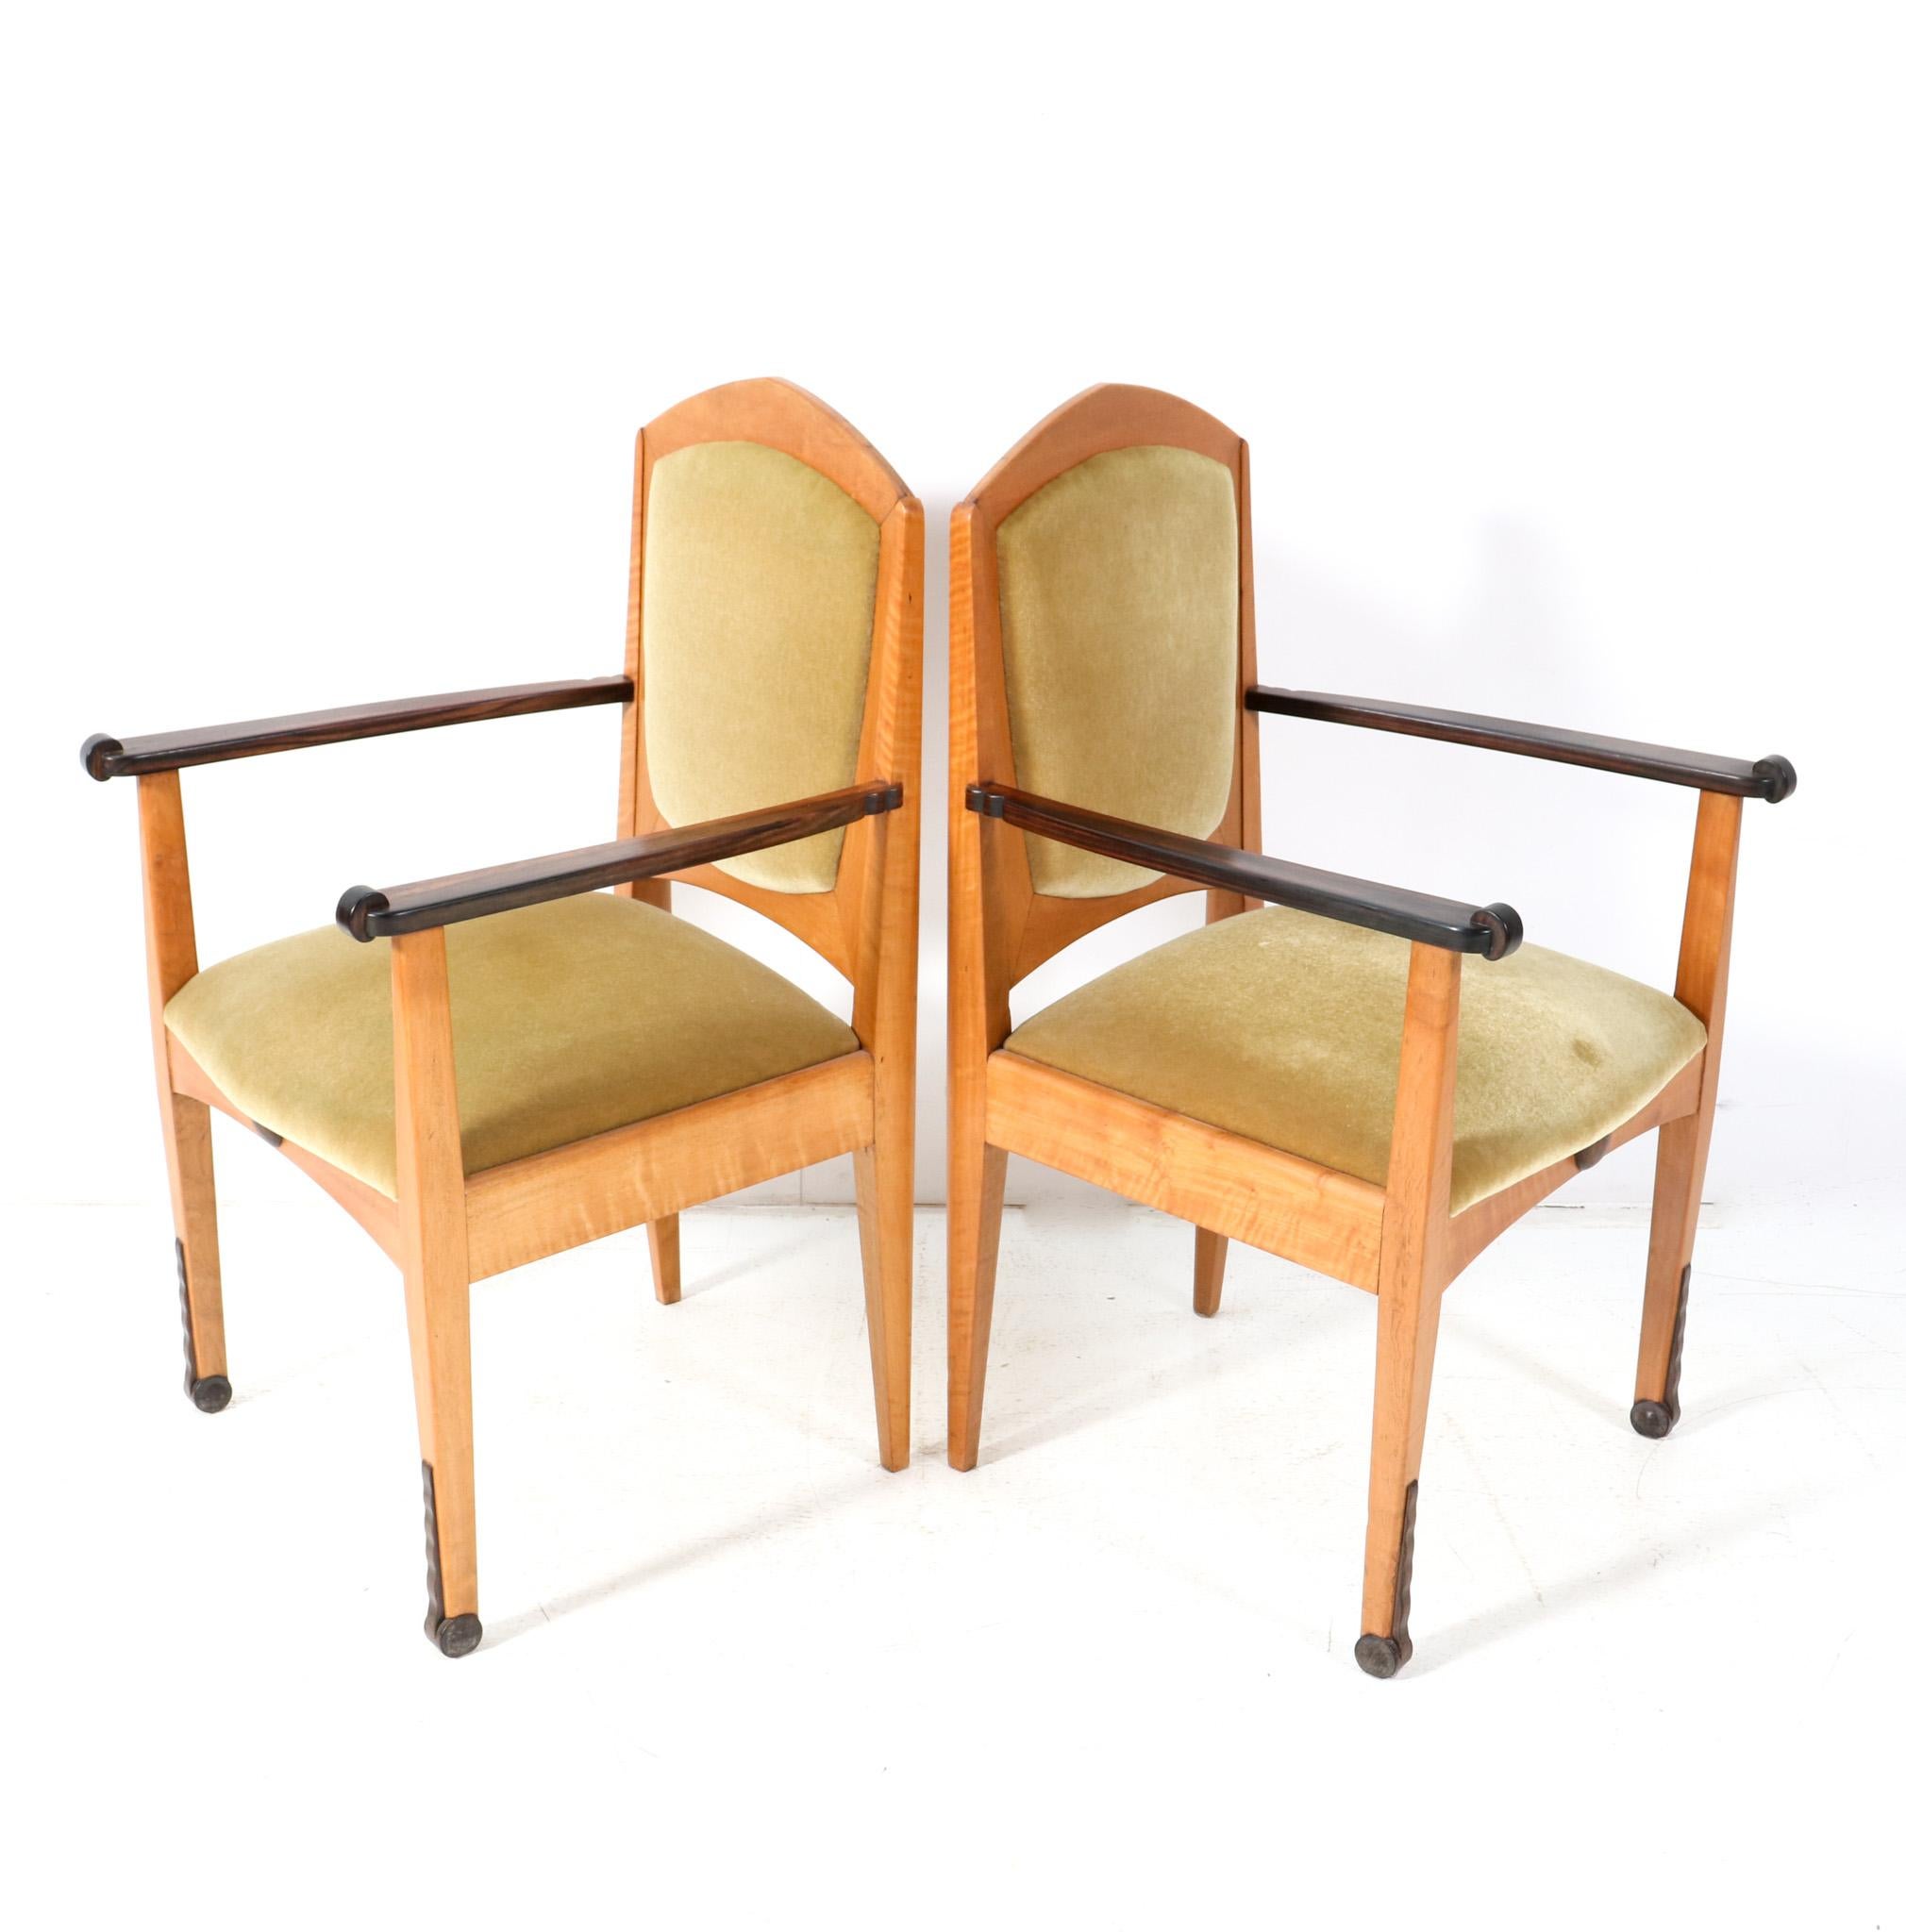 Set of Six Art Deco Amsterdamse School Dining Room Chairs by J.J. Zijfers, 1920s For Sale 2